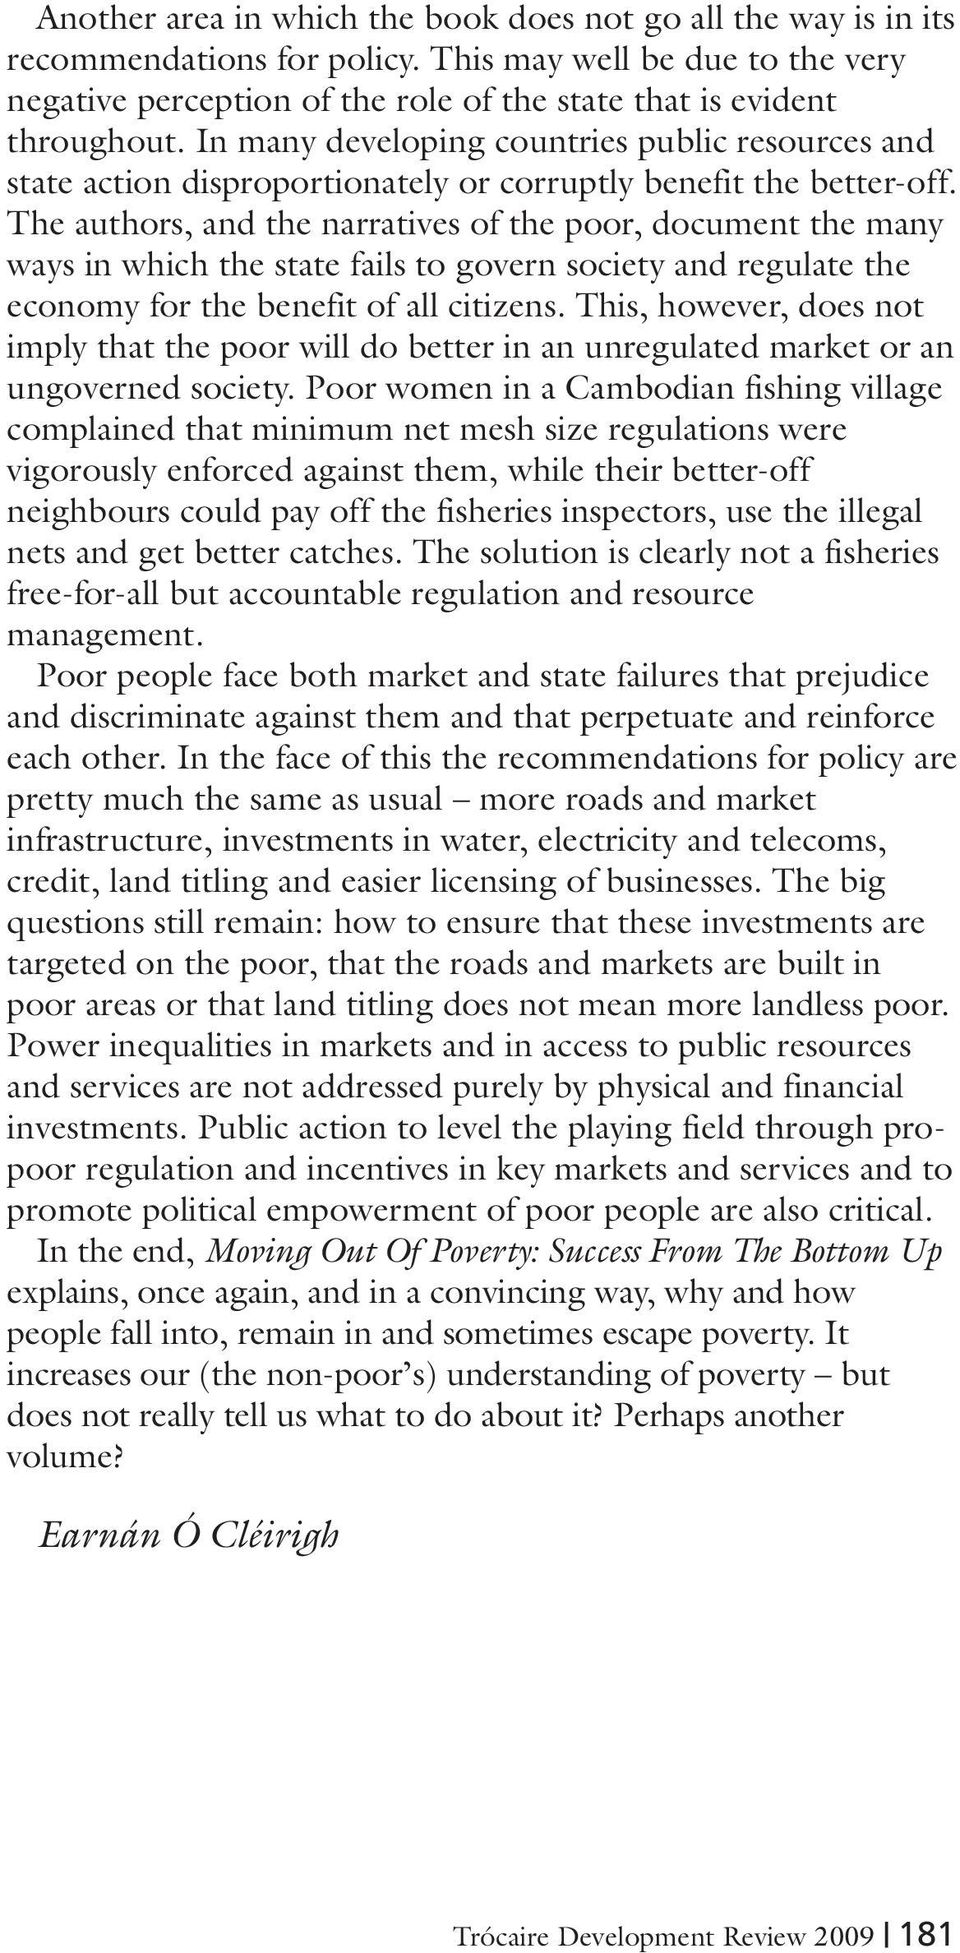 The authors, and the narratives of the poor, document the many ways in which the state fails to govern society and regulate the economy for the benefit of all citizens.